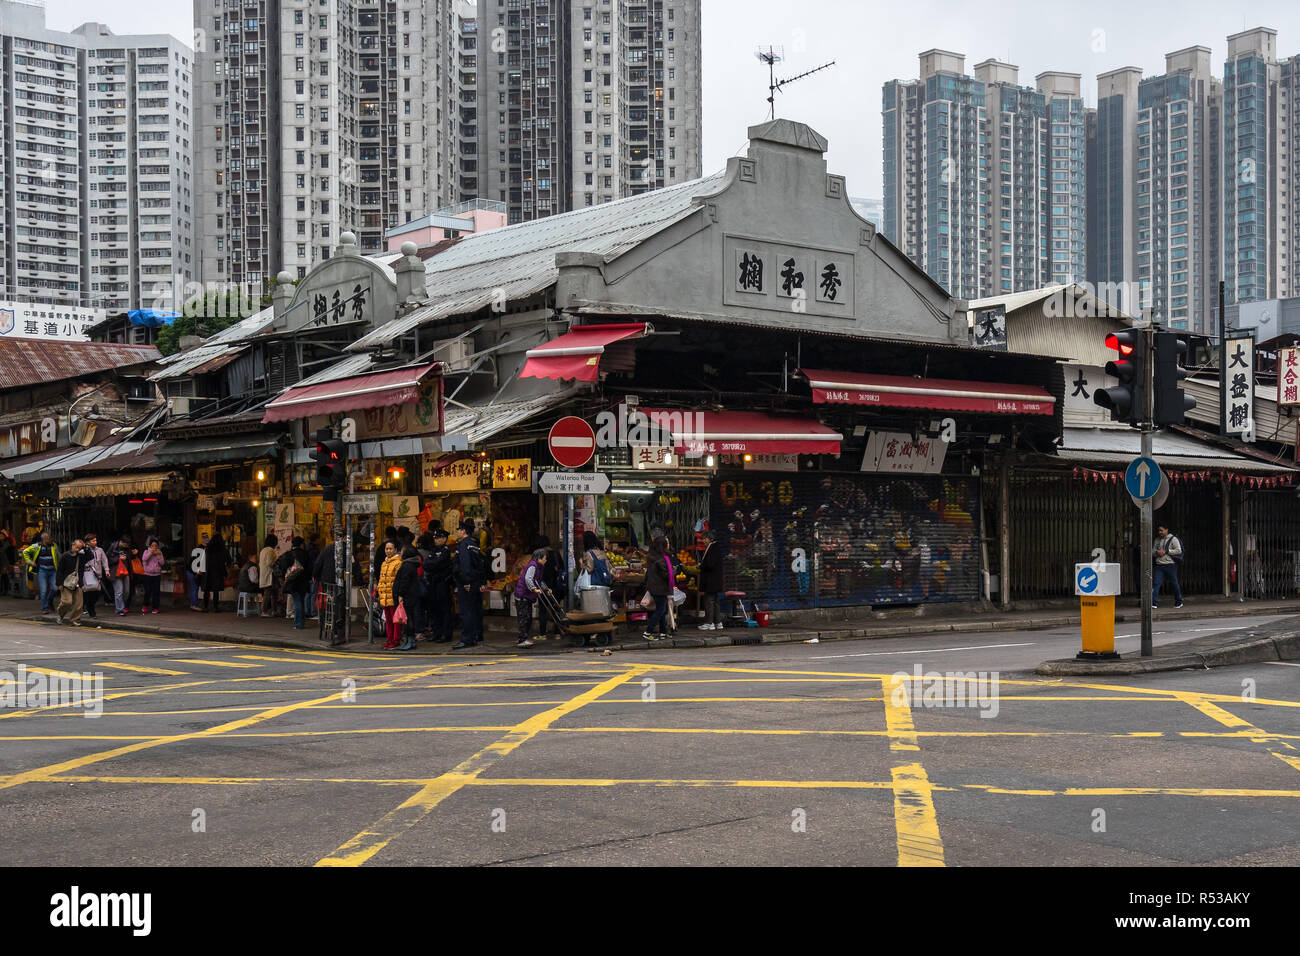 Yau Ma Tei Wholesale Fruit Market consists in several low-rise buildings, located at the junction of Reclamation Street and Waterloo Road, Hong Kong Stock Photo